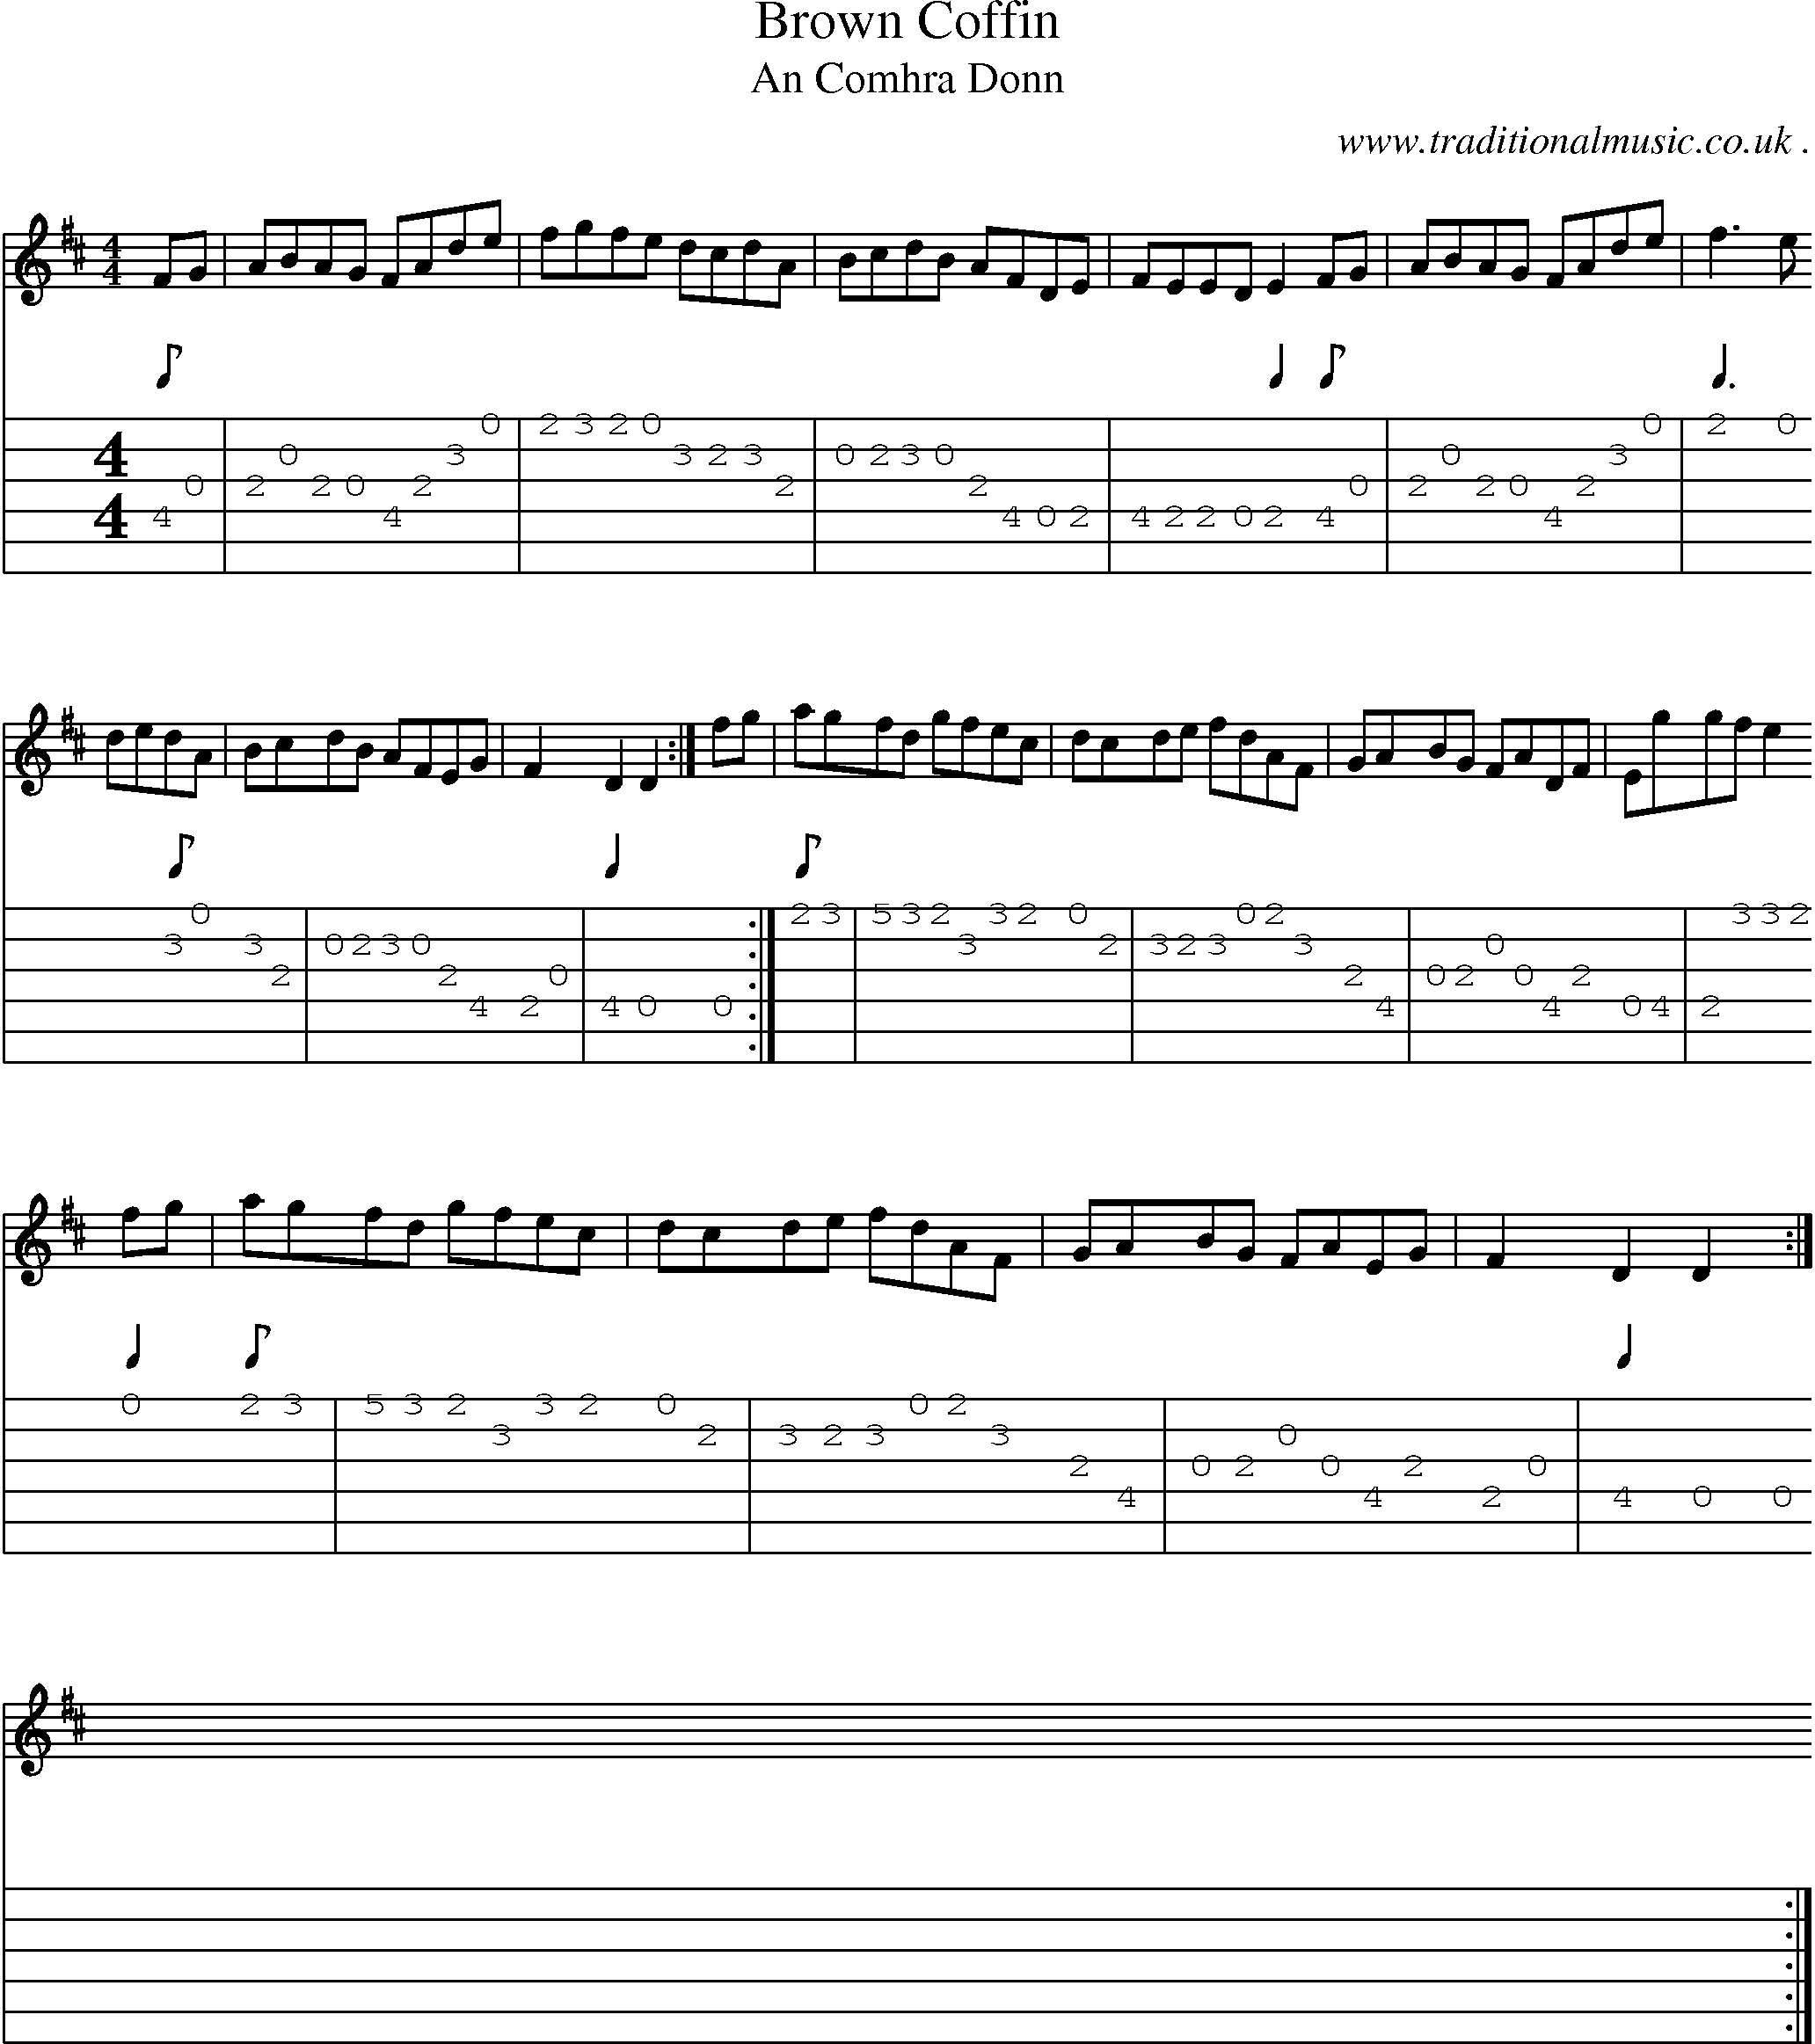 Sheet-Music and Guitar Tabs for Brown Coffin